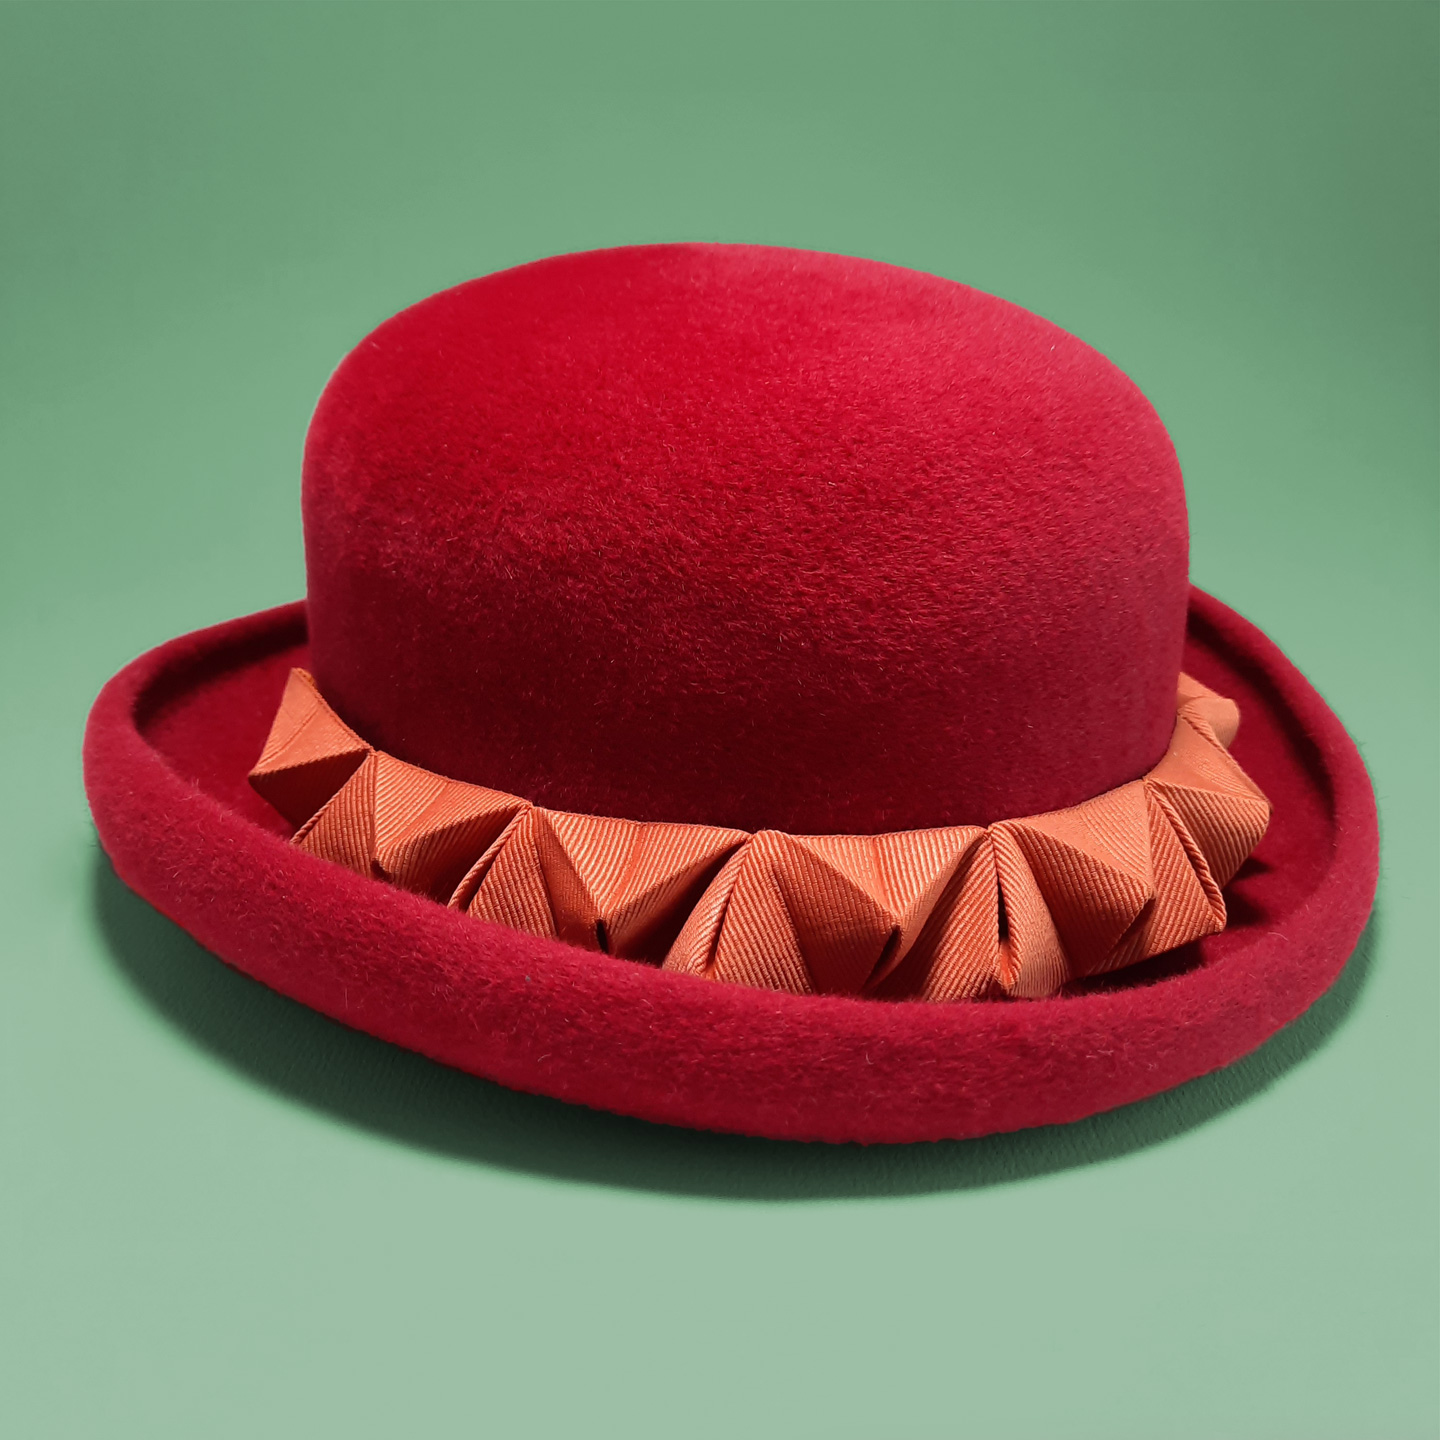 A red bowler hat with an orange 3D chameleon detail that can be transformed into a headband. A truly unique headpiece.